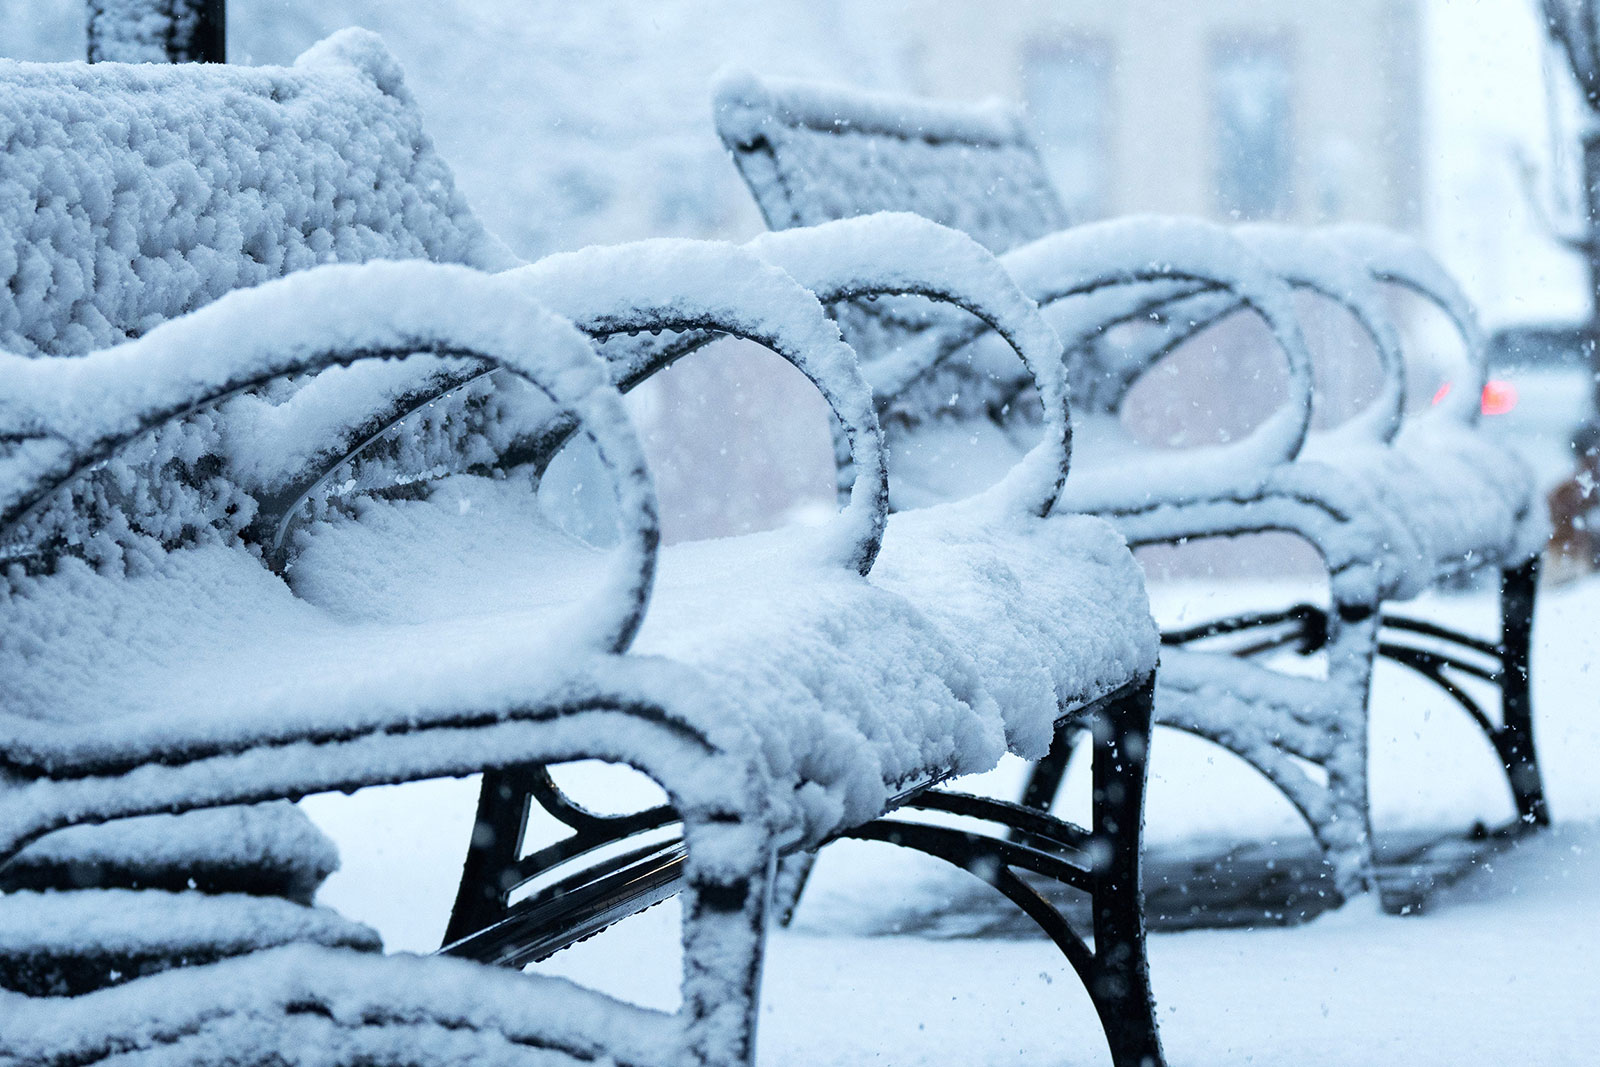 Park benches are packed with snow in Hackensack, New Jersey, on Tuesday.